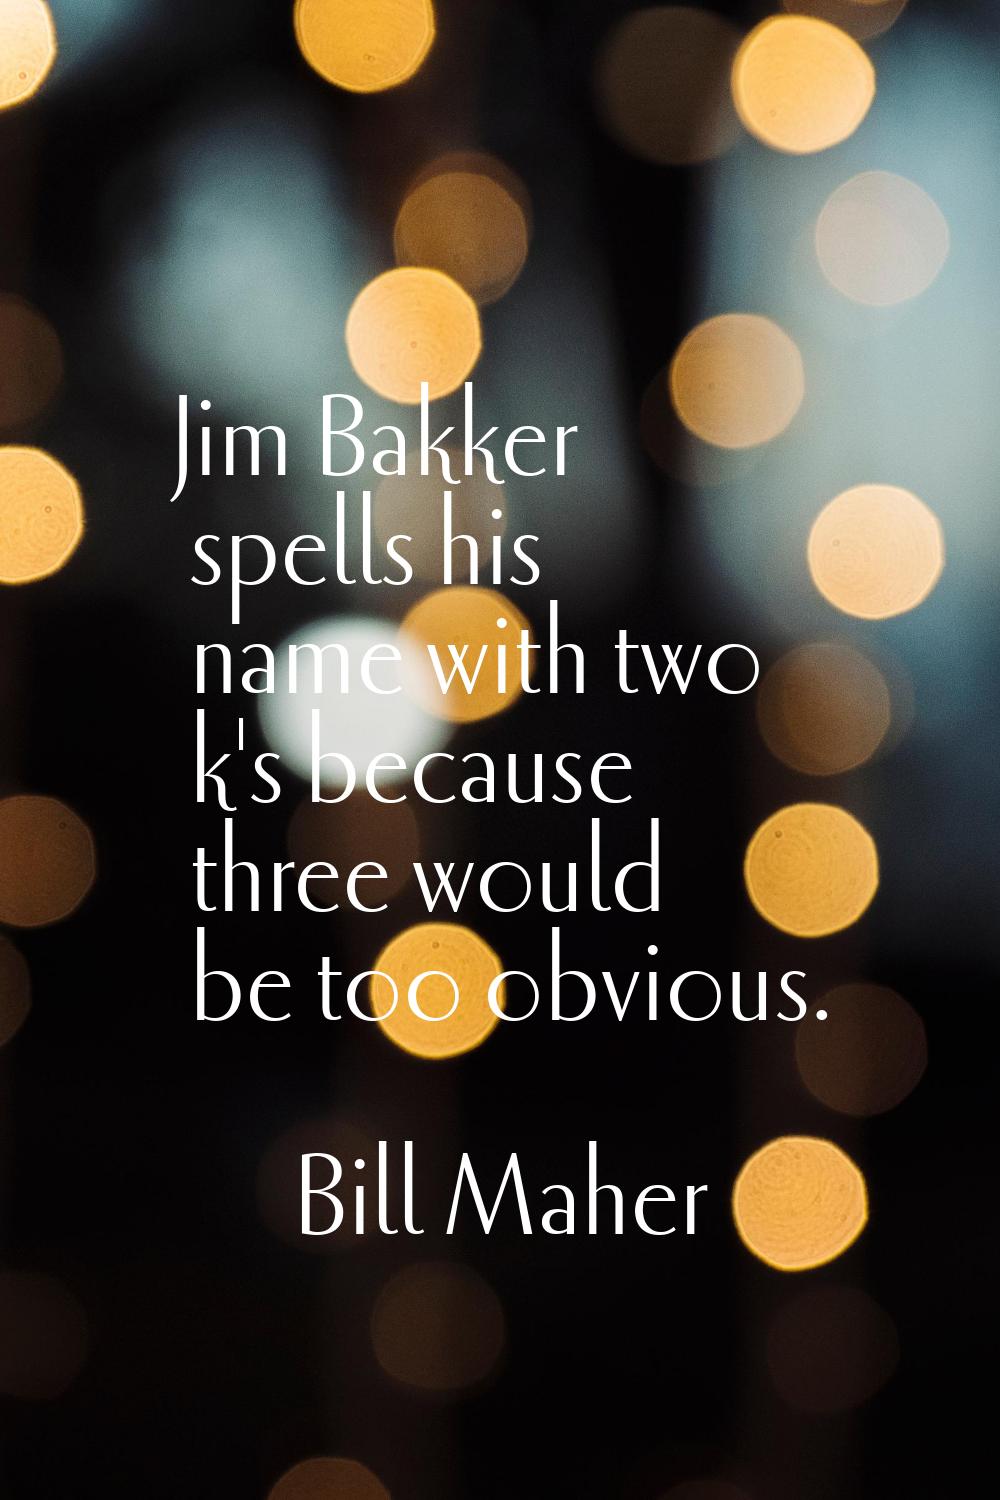 Jim Bakker spells his name with two k's because three would be too obvious.